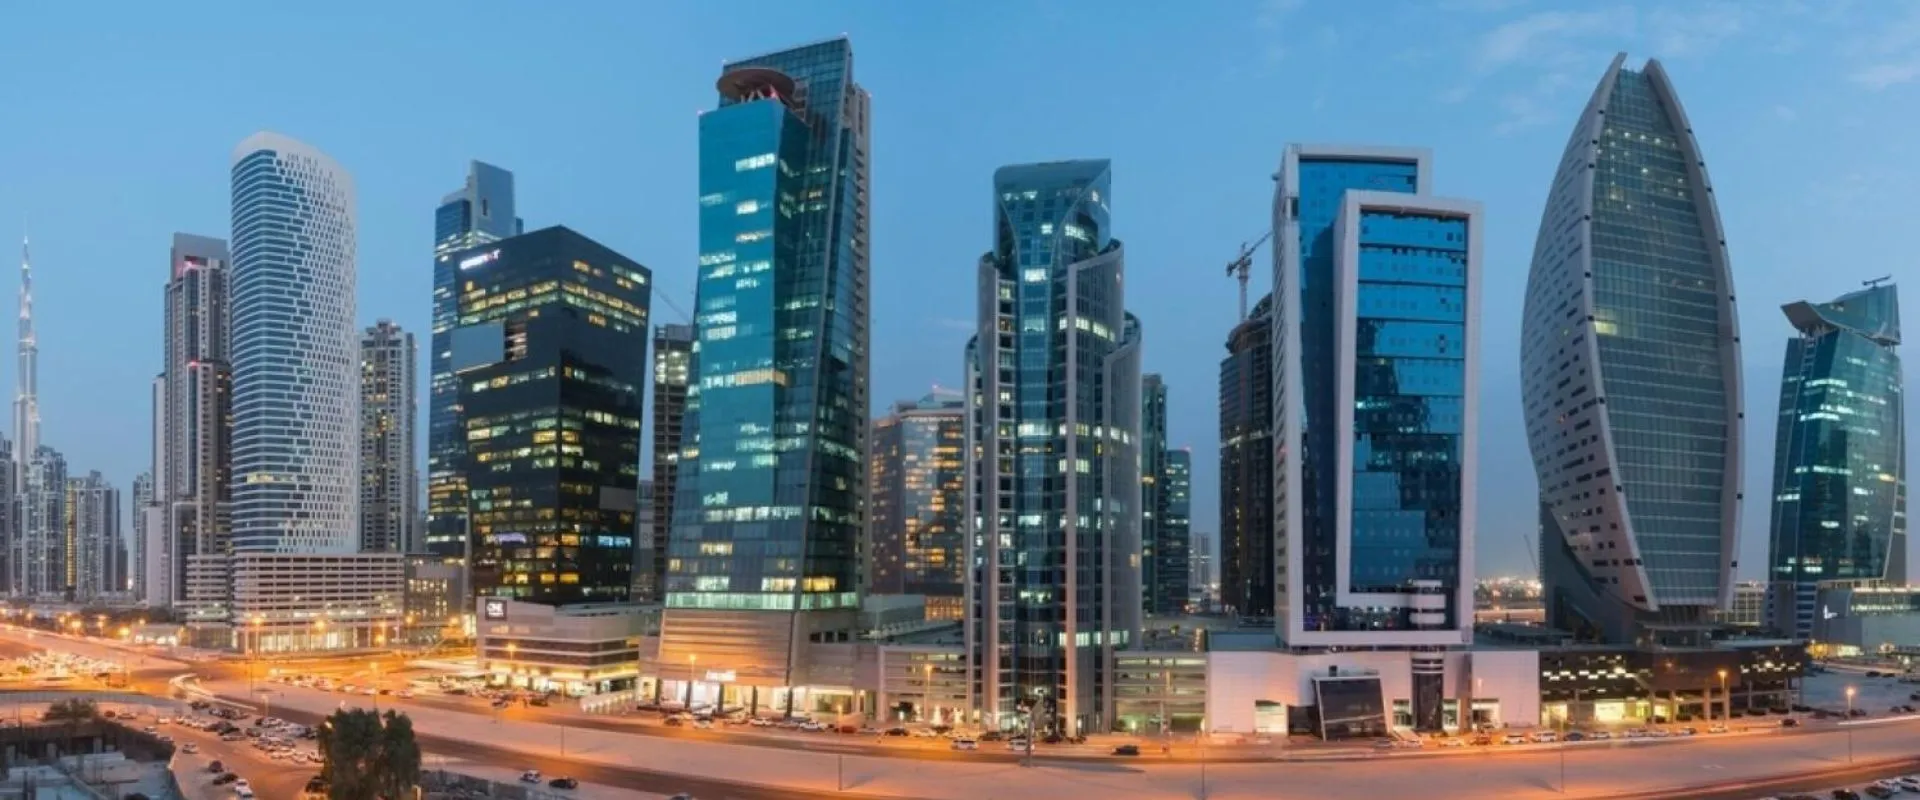 The-Indians-dethrone-the-British-as-the-largest-investors-in-Dubais-real-estate-market